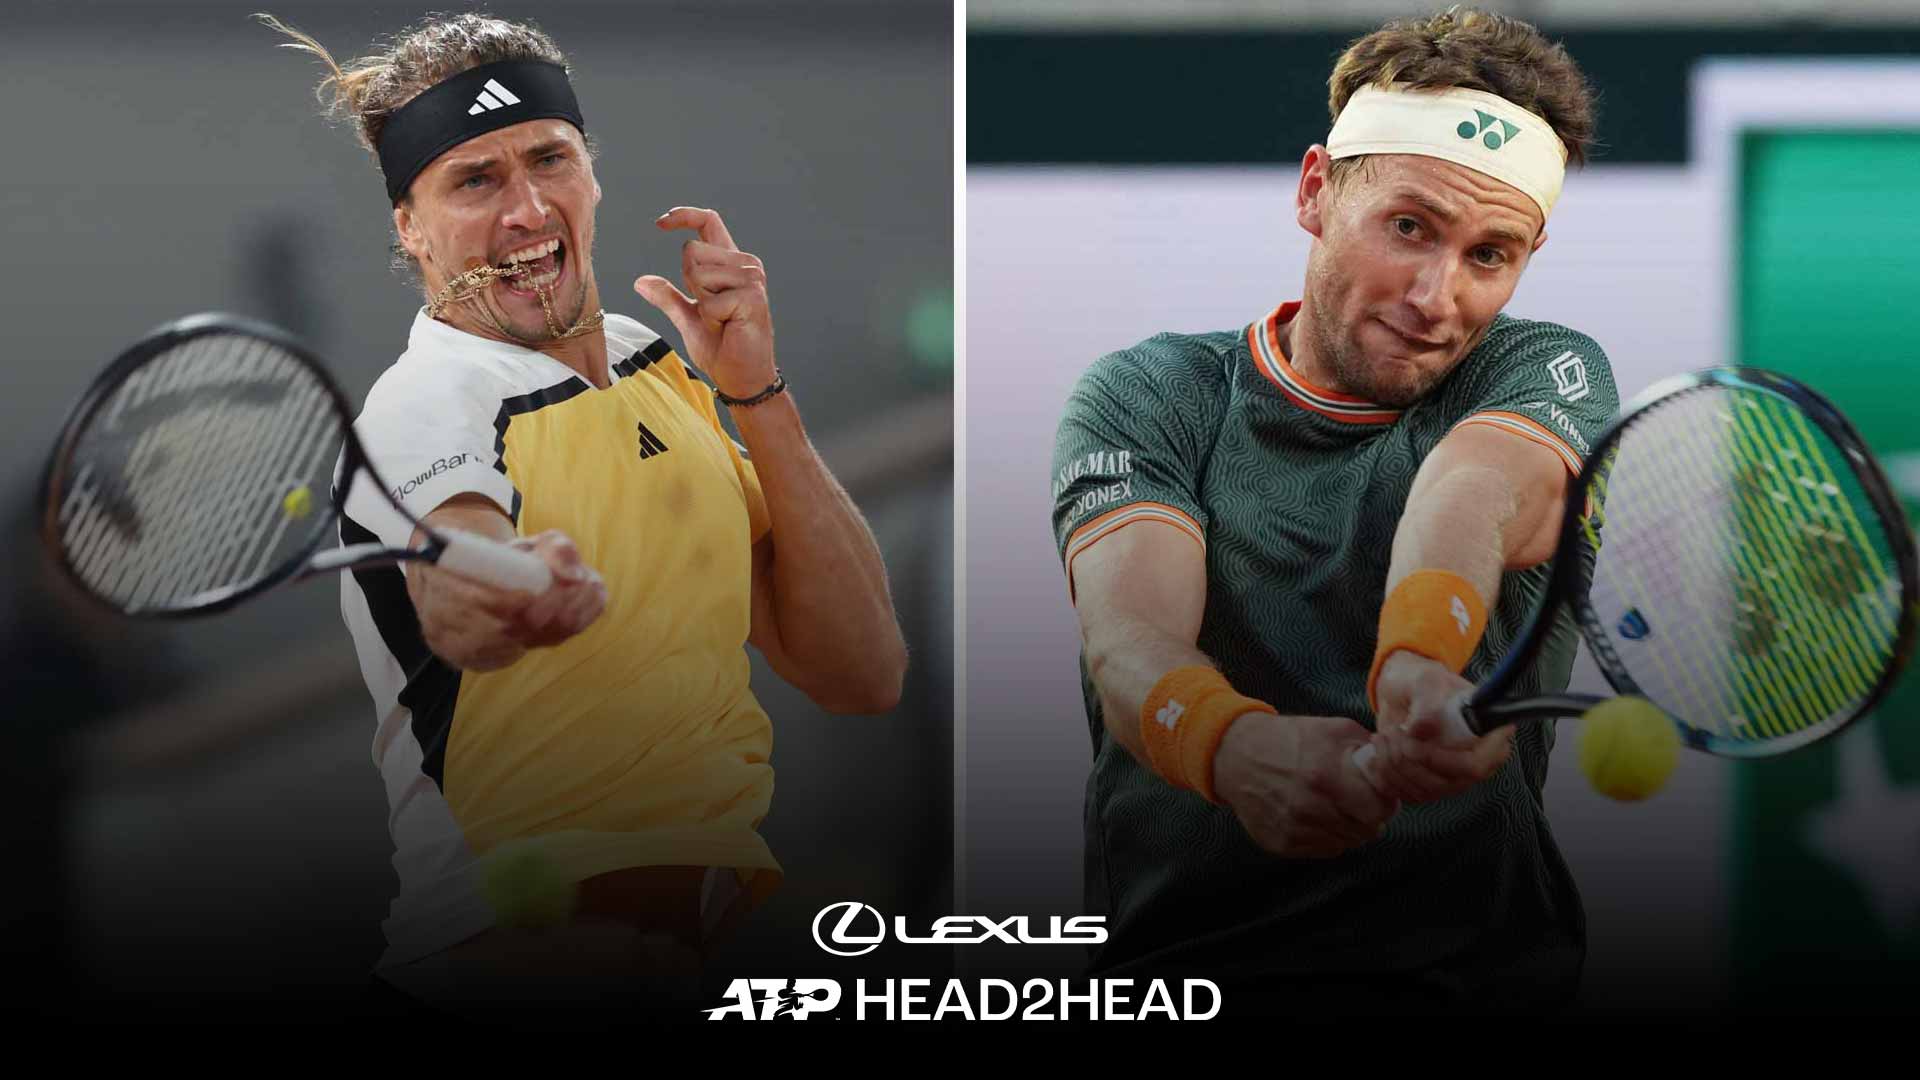 Alexander Zverev and Casper Ruud will meet in the Roland Garros semi-finals for the second straight year.